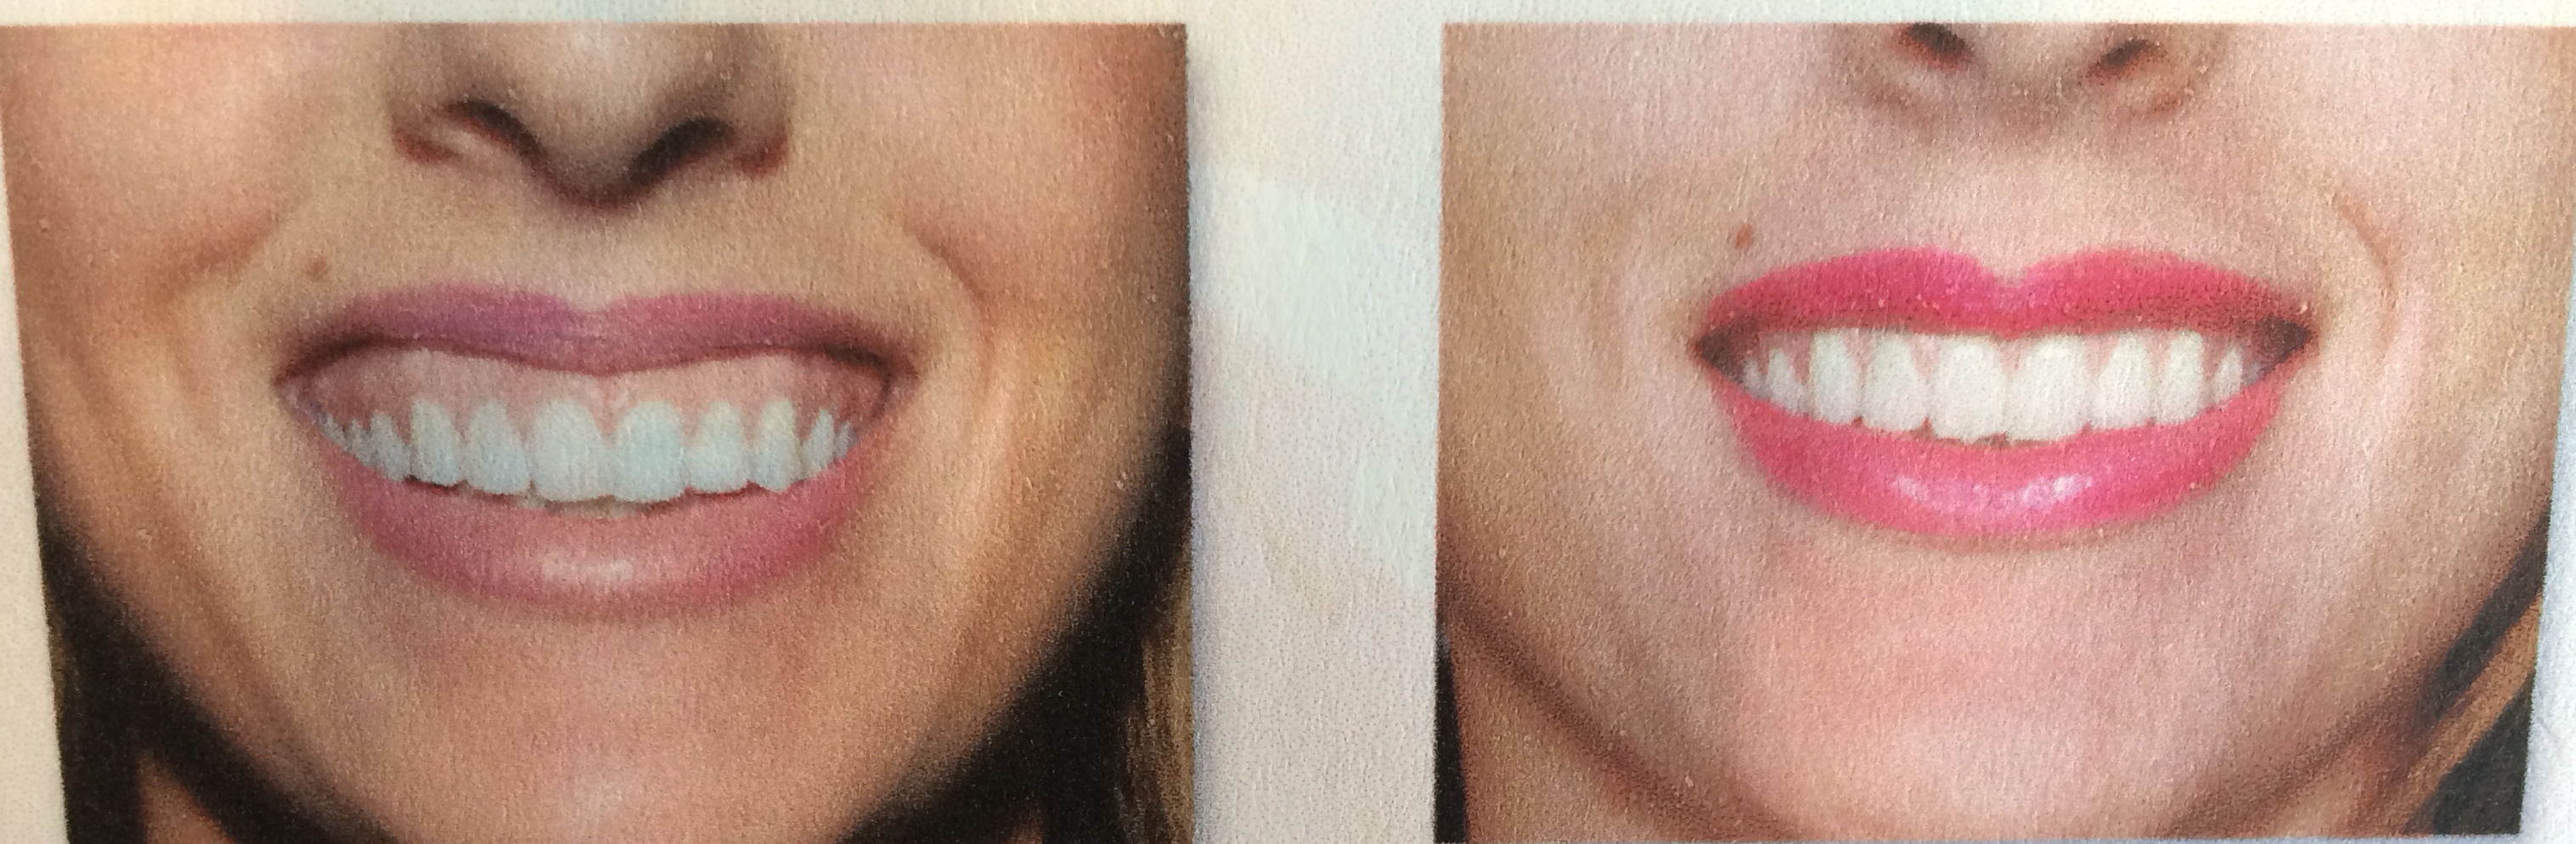 THE GUMMY SMILE, BOTOX CAN FIX IT! Dr. Rita The Smile